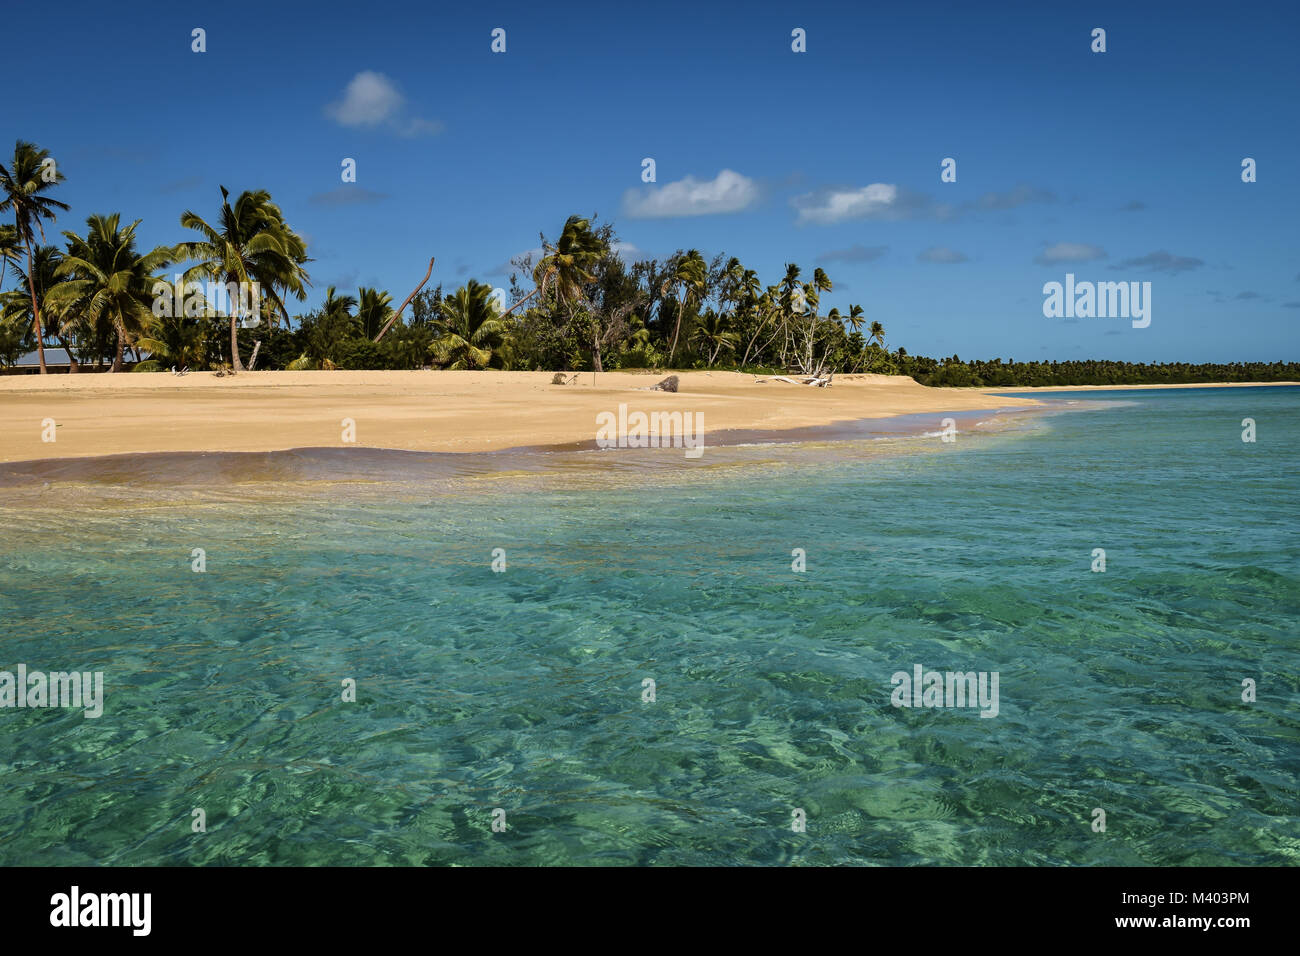 Clear blue sea and white sand beach with coconut palms, Uoleva, Tonga Stock Photo